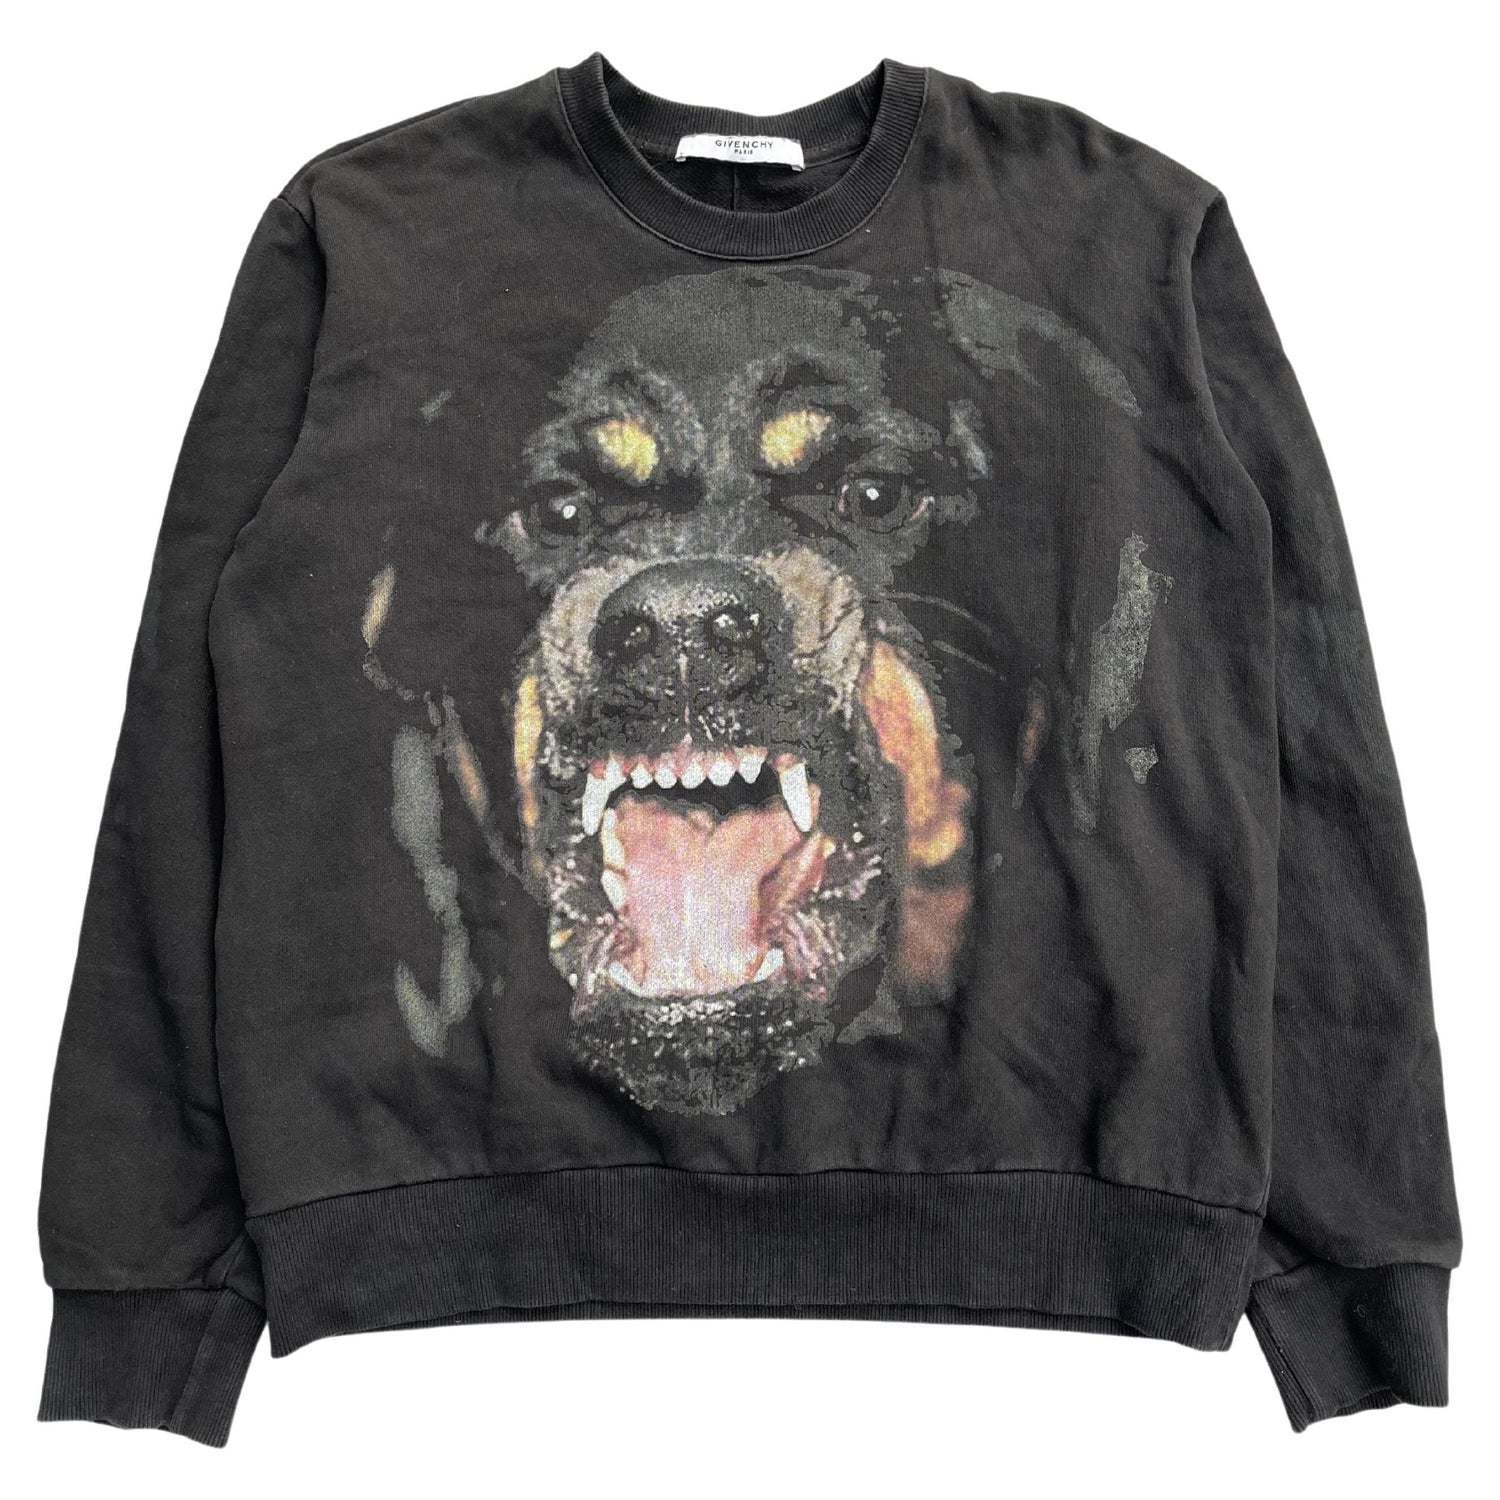 Givenchy Rottweiler Sweatshirt - For Sale on 1stDibs | givenchy rottweiler  jumper, givenchy rottweiler sweater, givenchy sweatshirt rottweiler